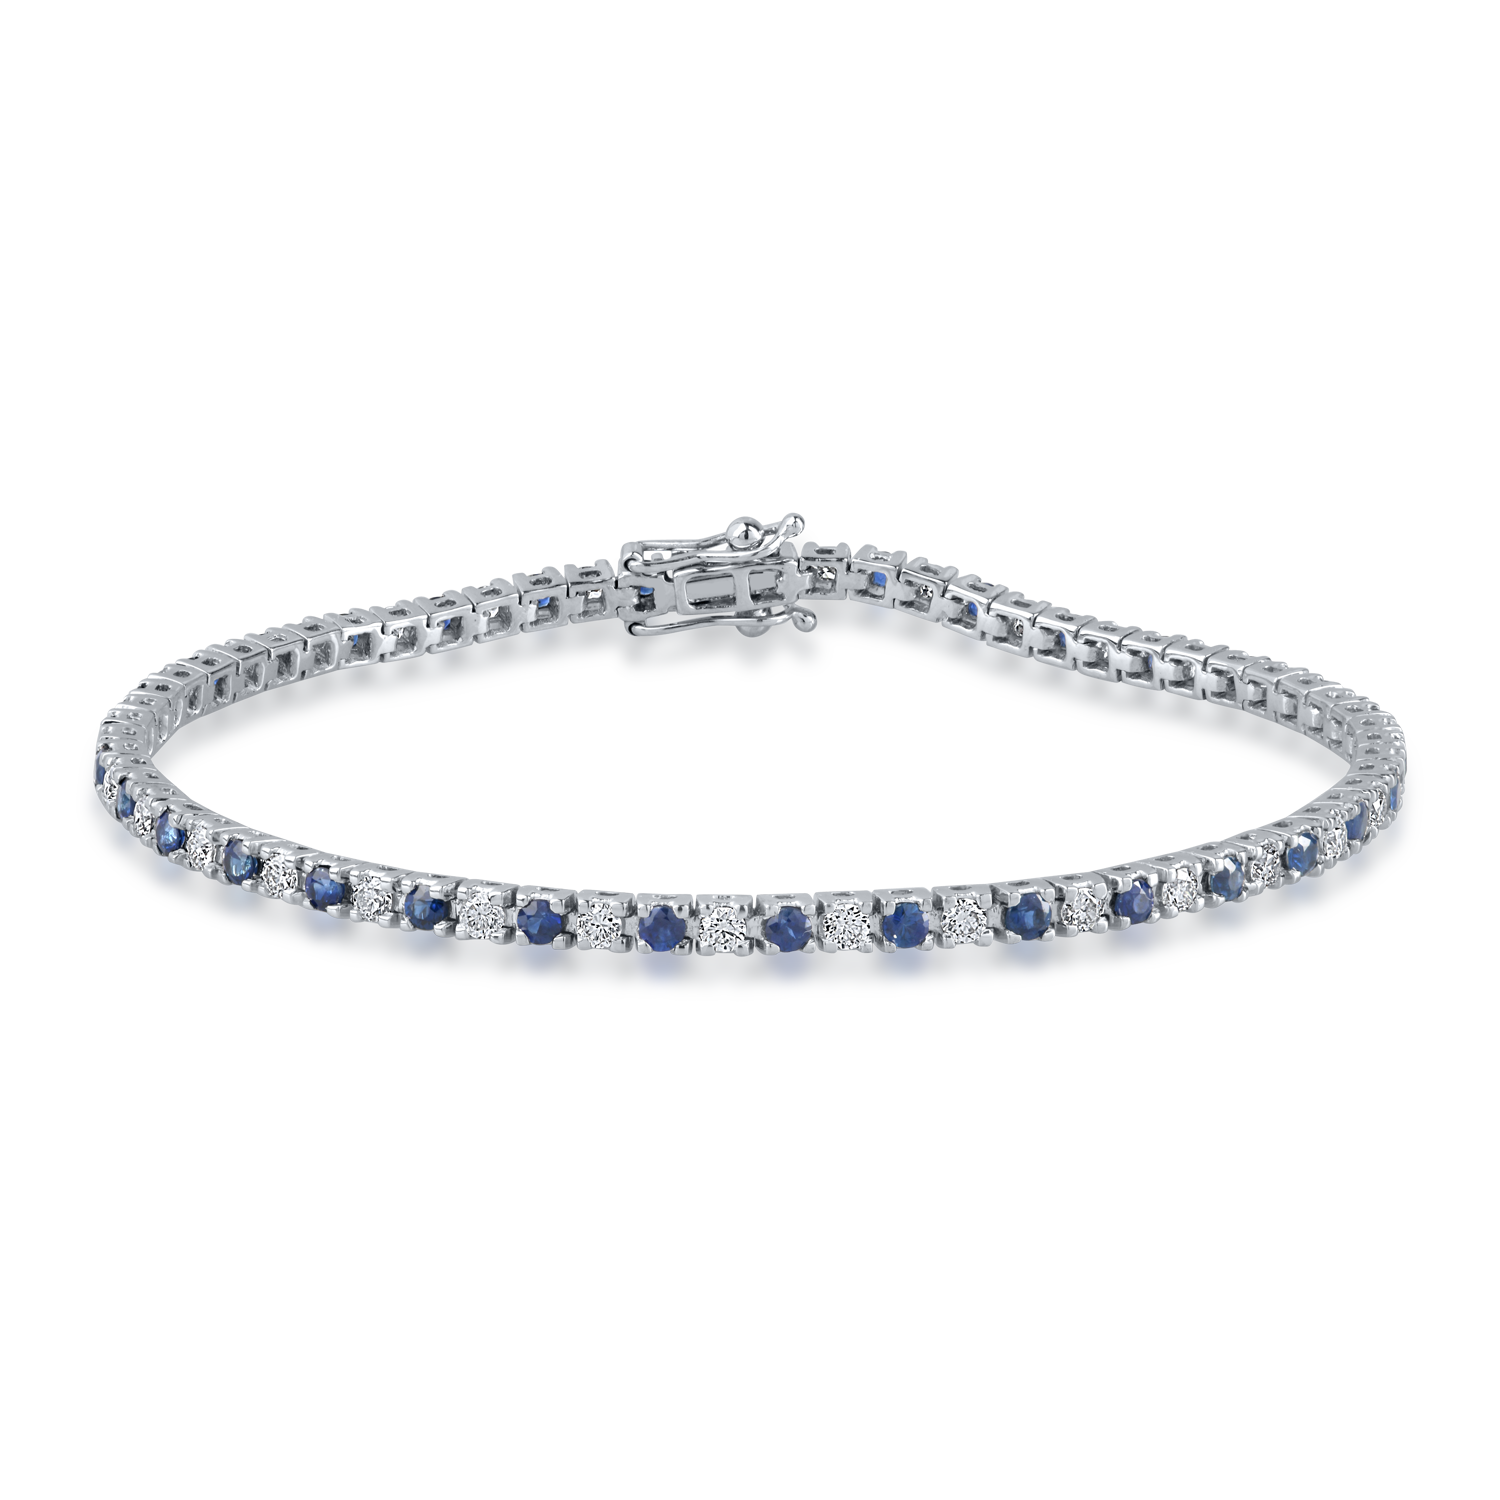 White gold tennis bracelet with 1.83ct sapphires and 1.44ct diamonds